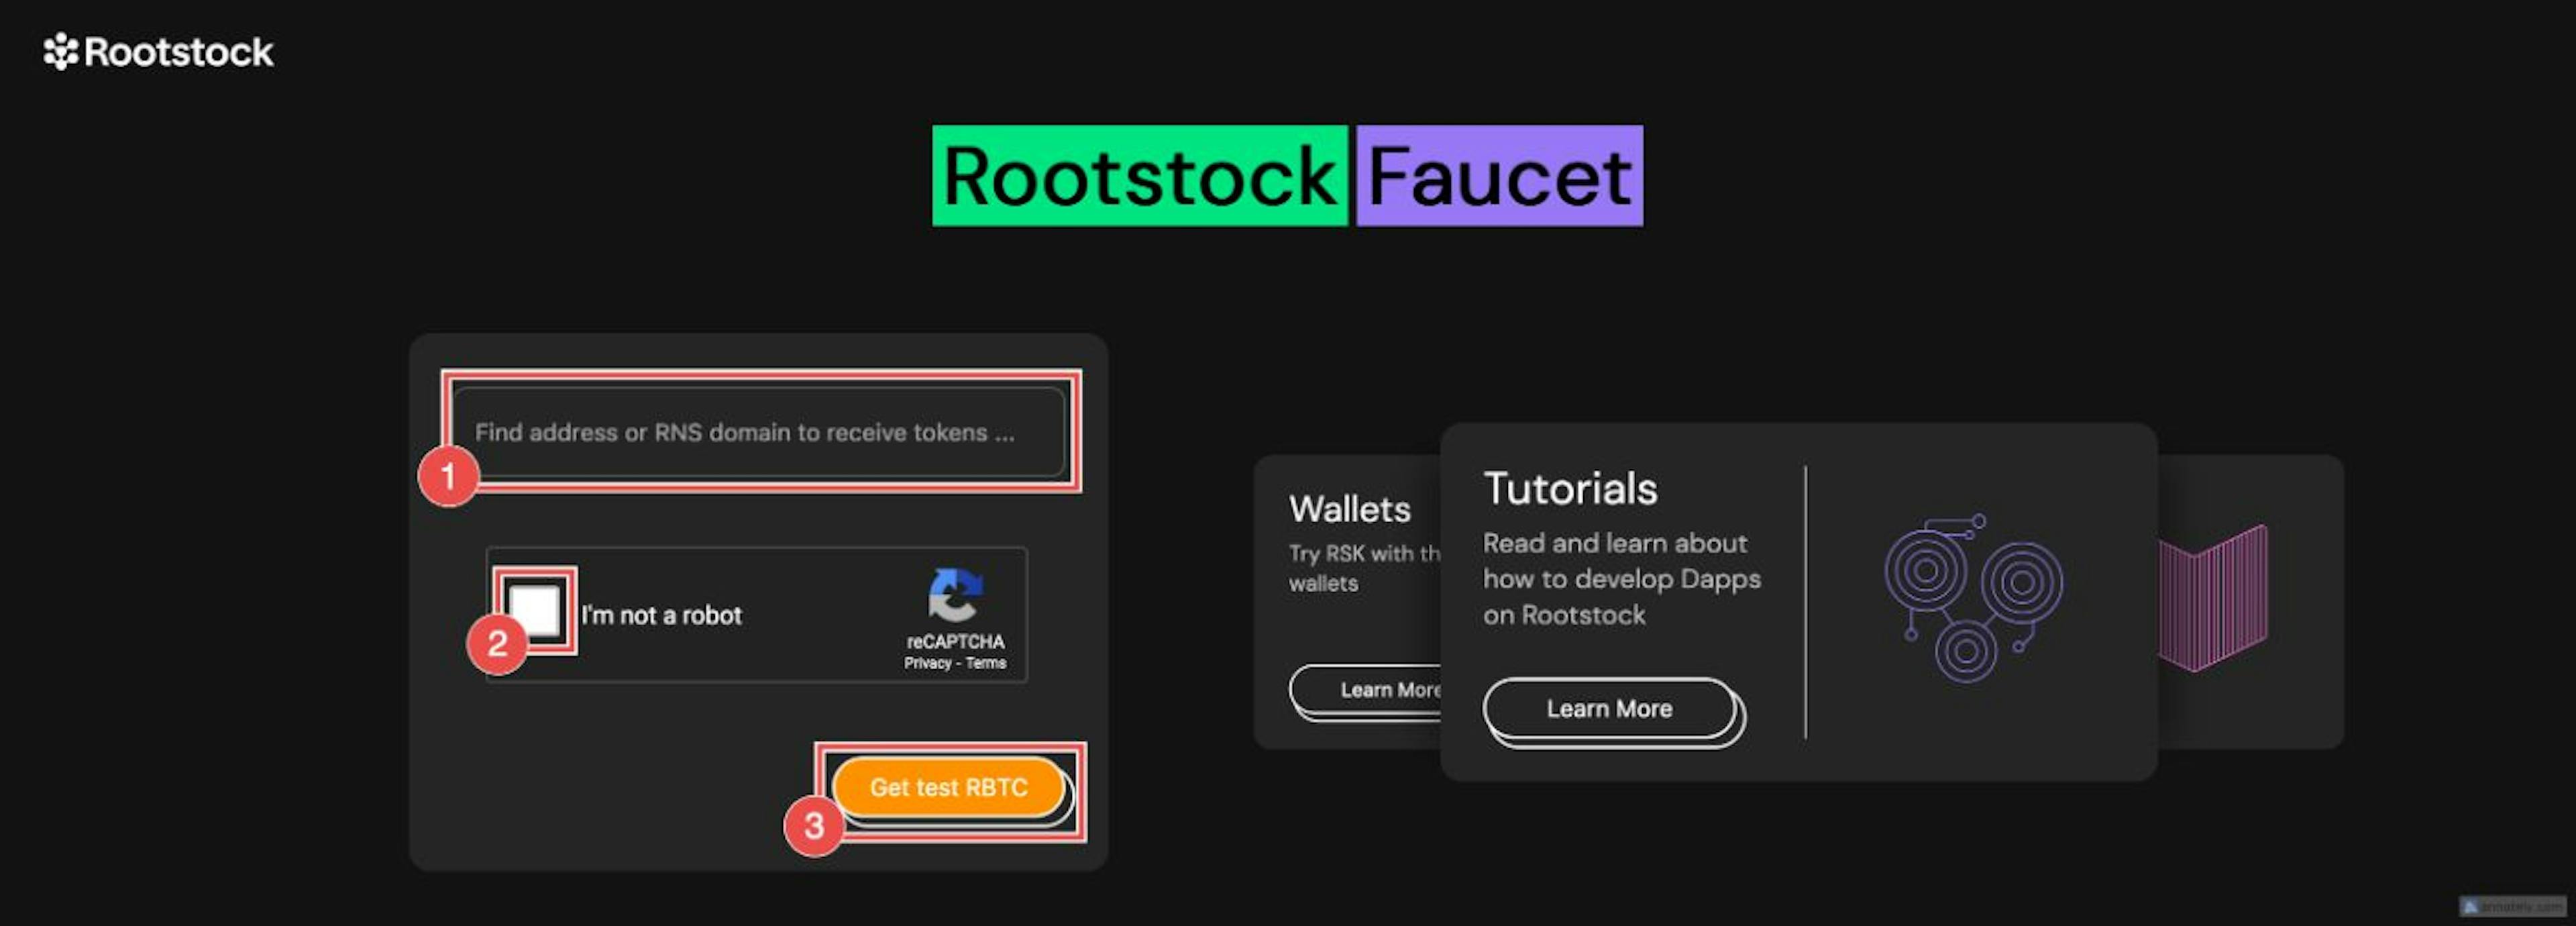 Rootstock Faucet 